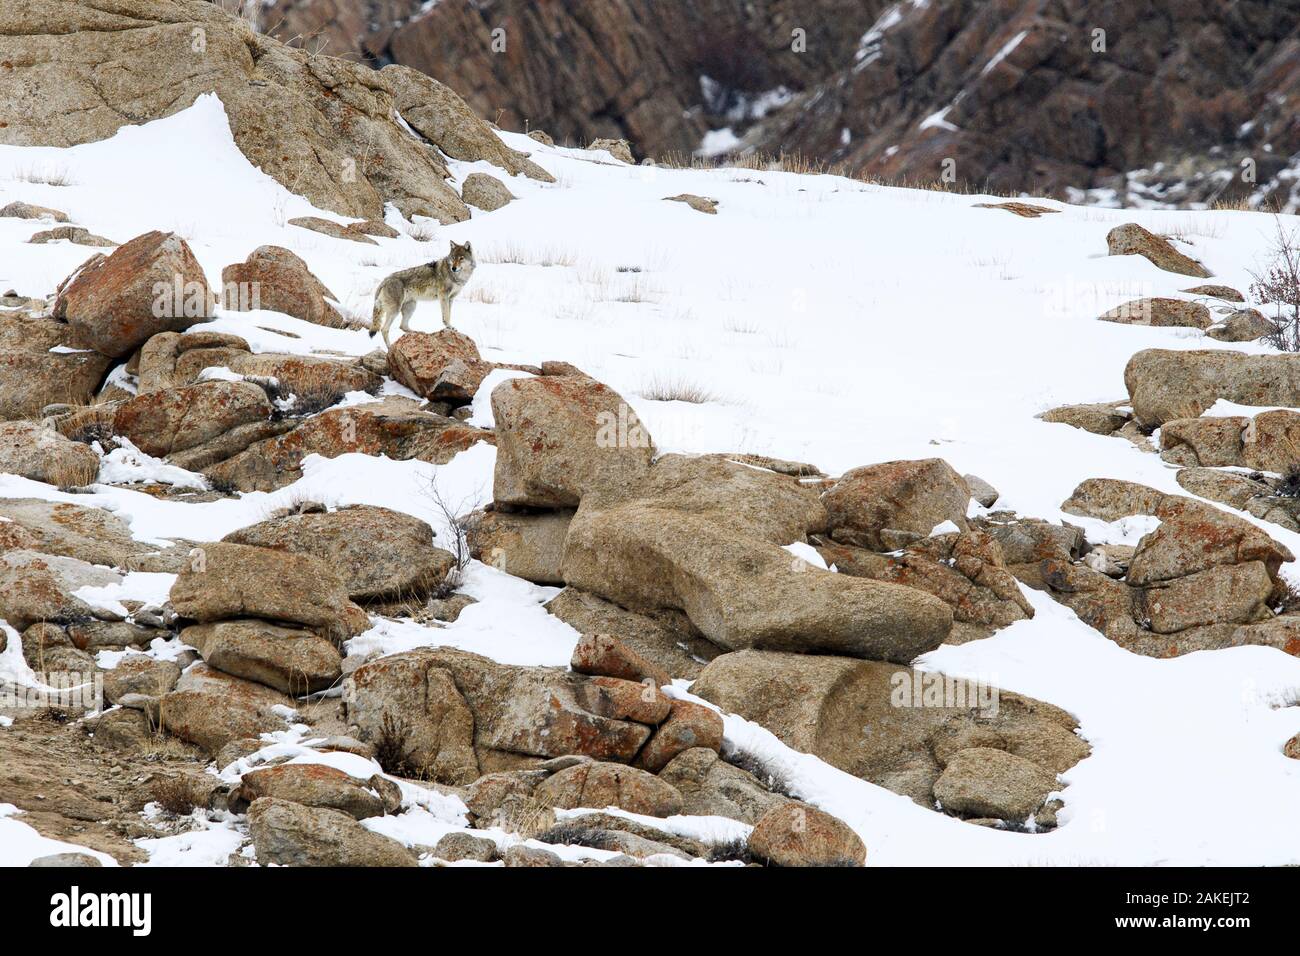 Wolf (Canis lupus) male on rocky snow covered slopes. Ulley Valley in the Himalayas, Ladakh, India. Stock Photo